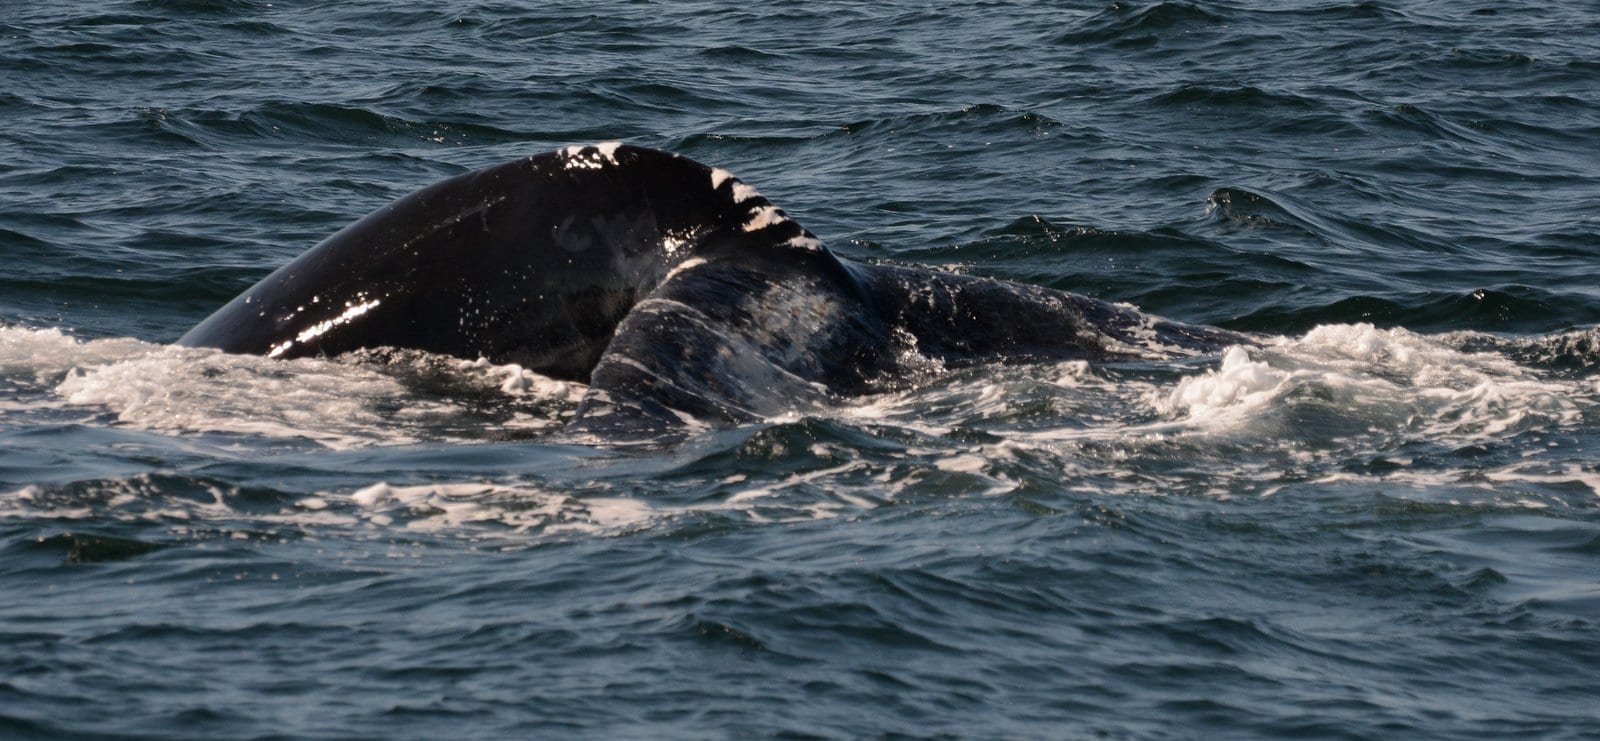 right whale, look at those scars 